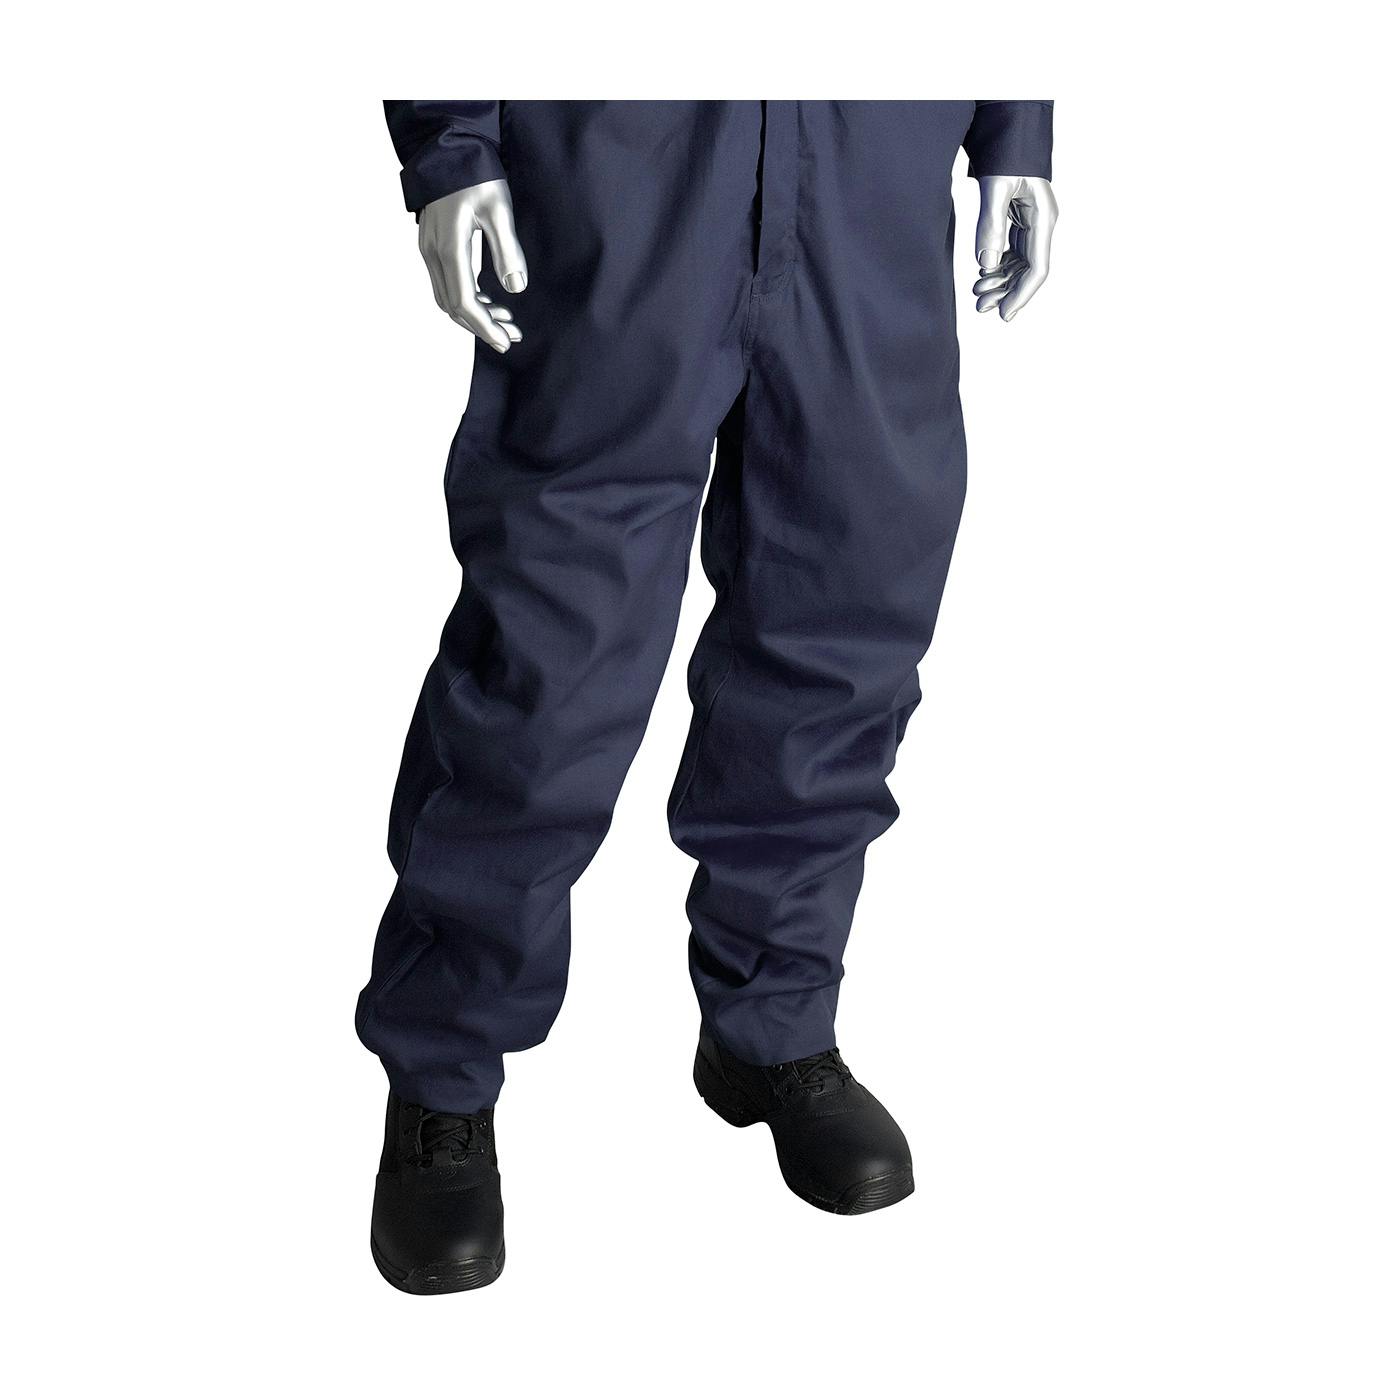 AR/FR Dual Certified Coverall with Zipper Closure - 9.2 Cal/cm2, Navy (385-FRSC) - 2XL